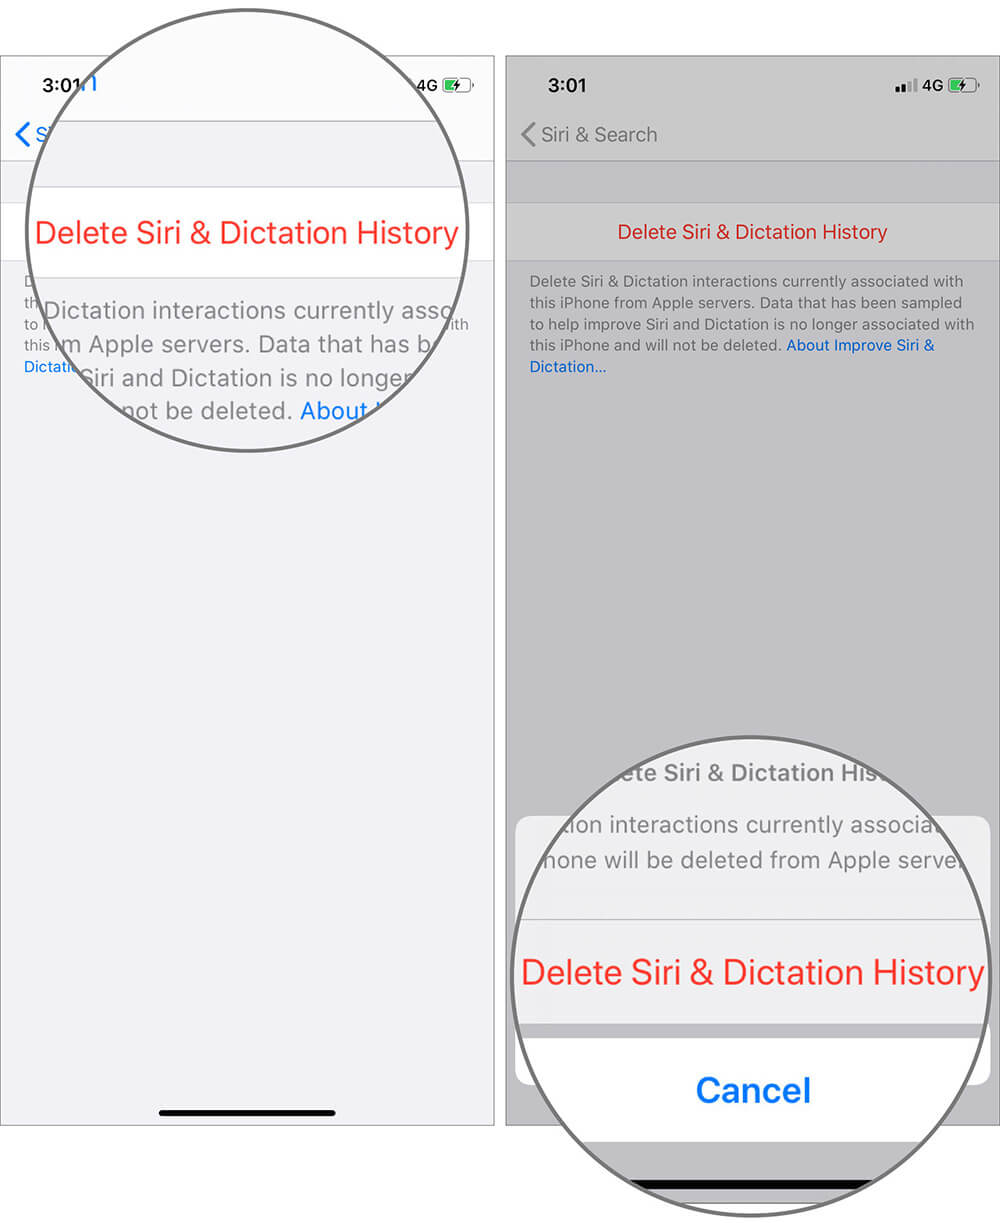 Confirm Request by Tapping on Delete Siri and Dictation History in iOS 13 Device